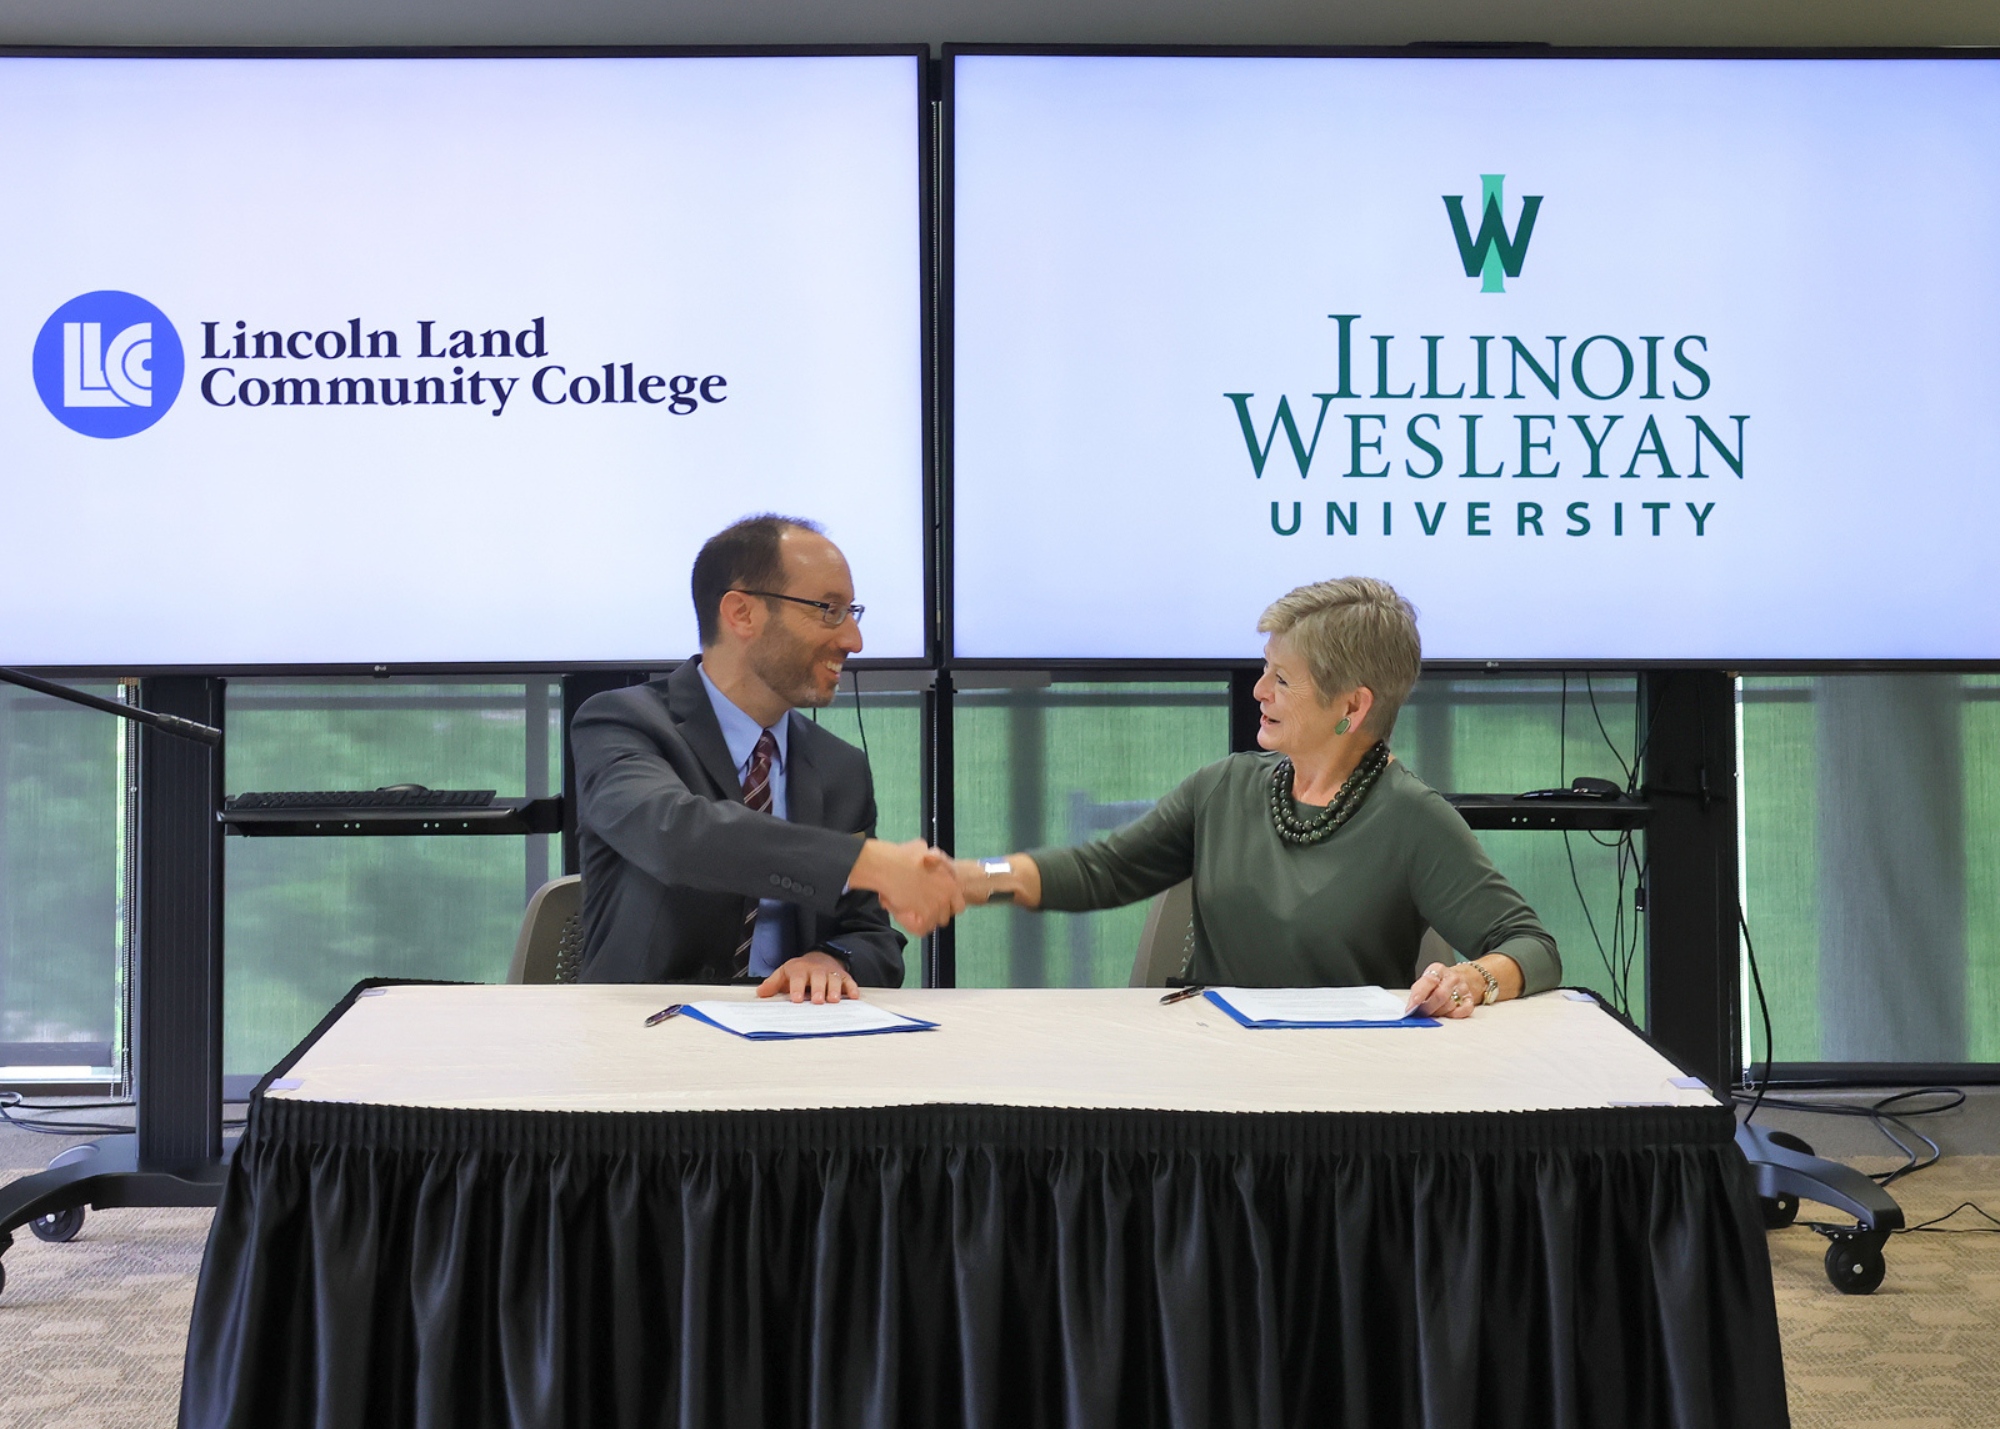 Jason Dockter of Lincoln Land shakes hands with Georgia Nugent of Illinois Wesleyan